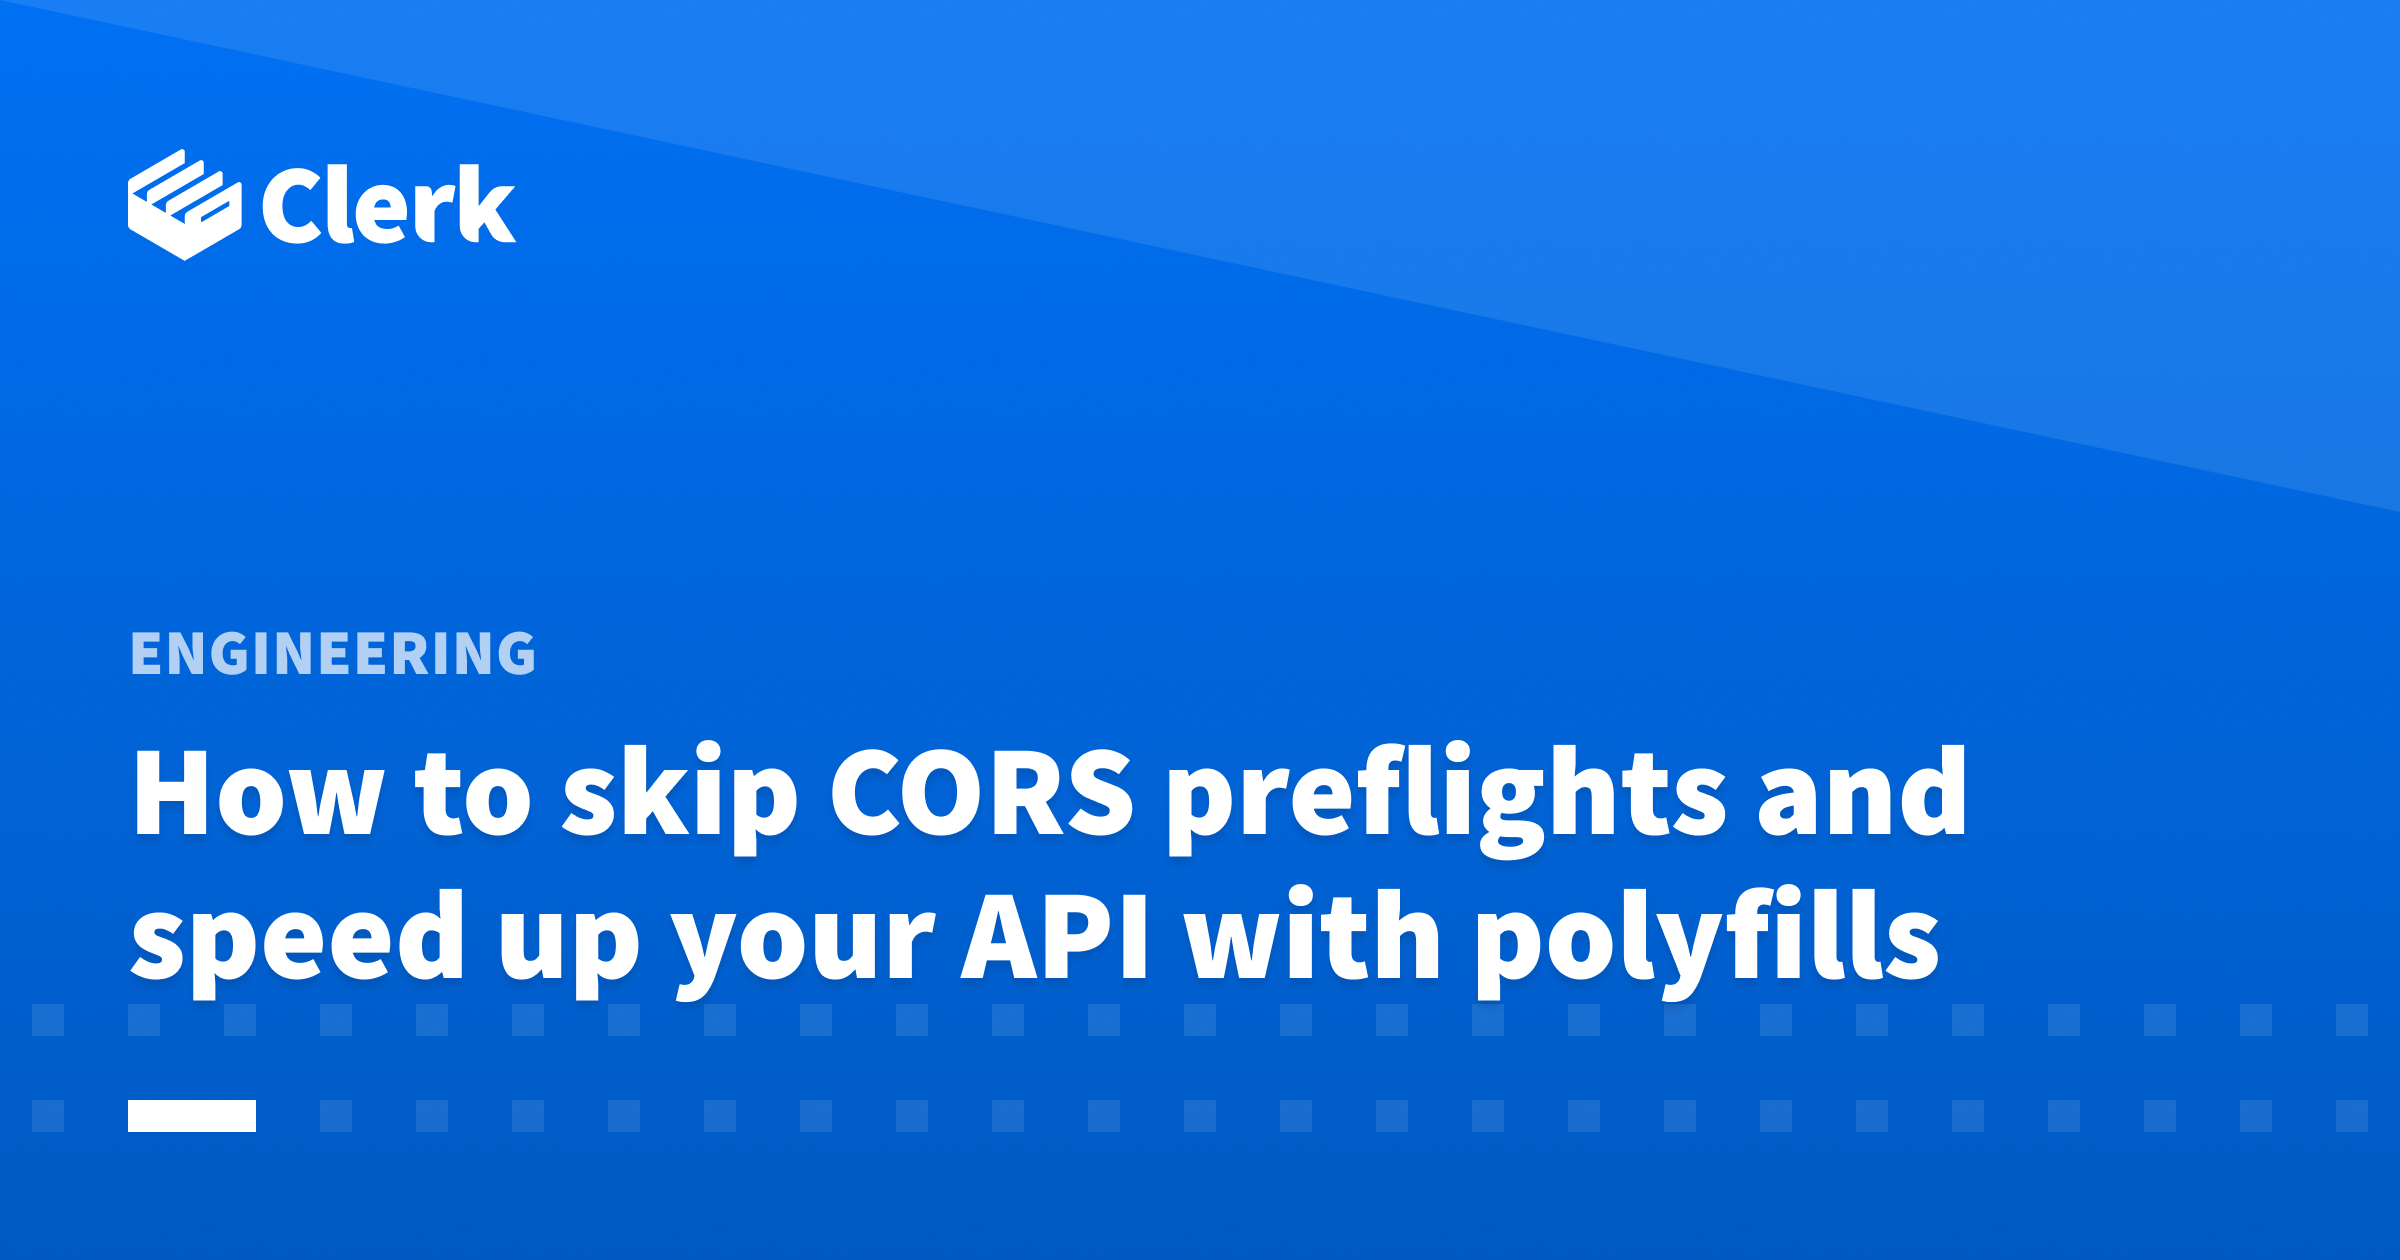 How to skip CORS preflights and speed up your API with polyfills